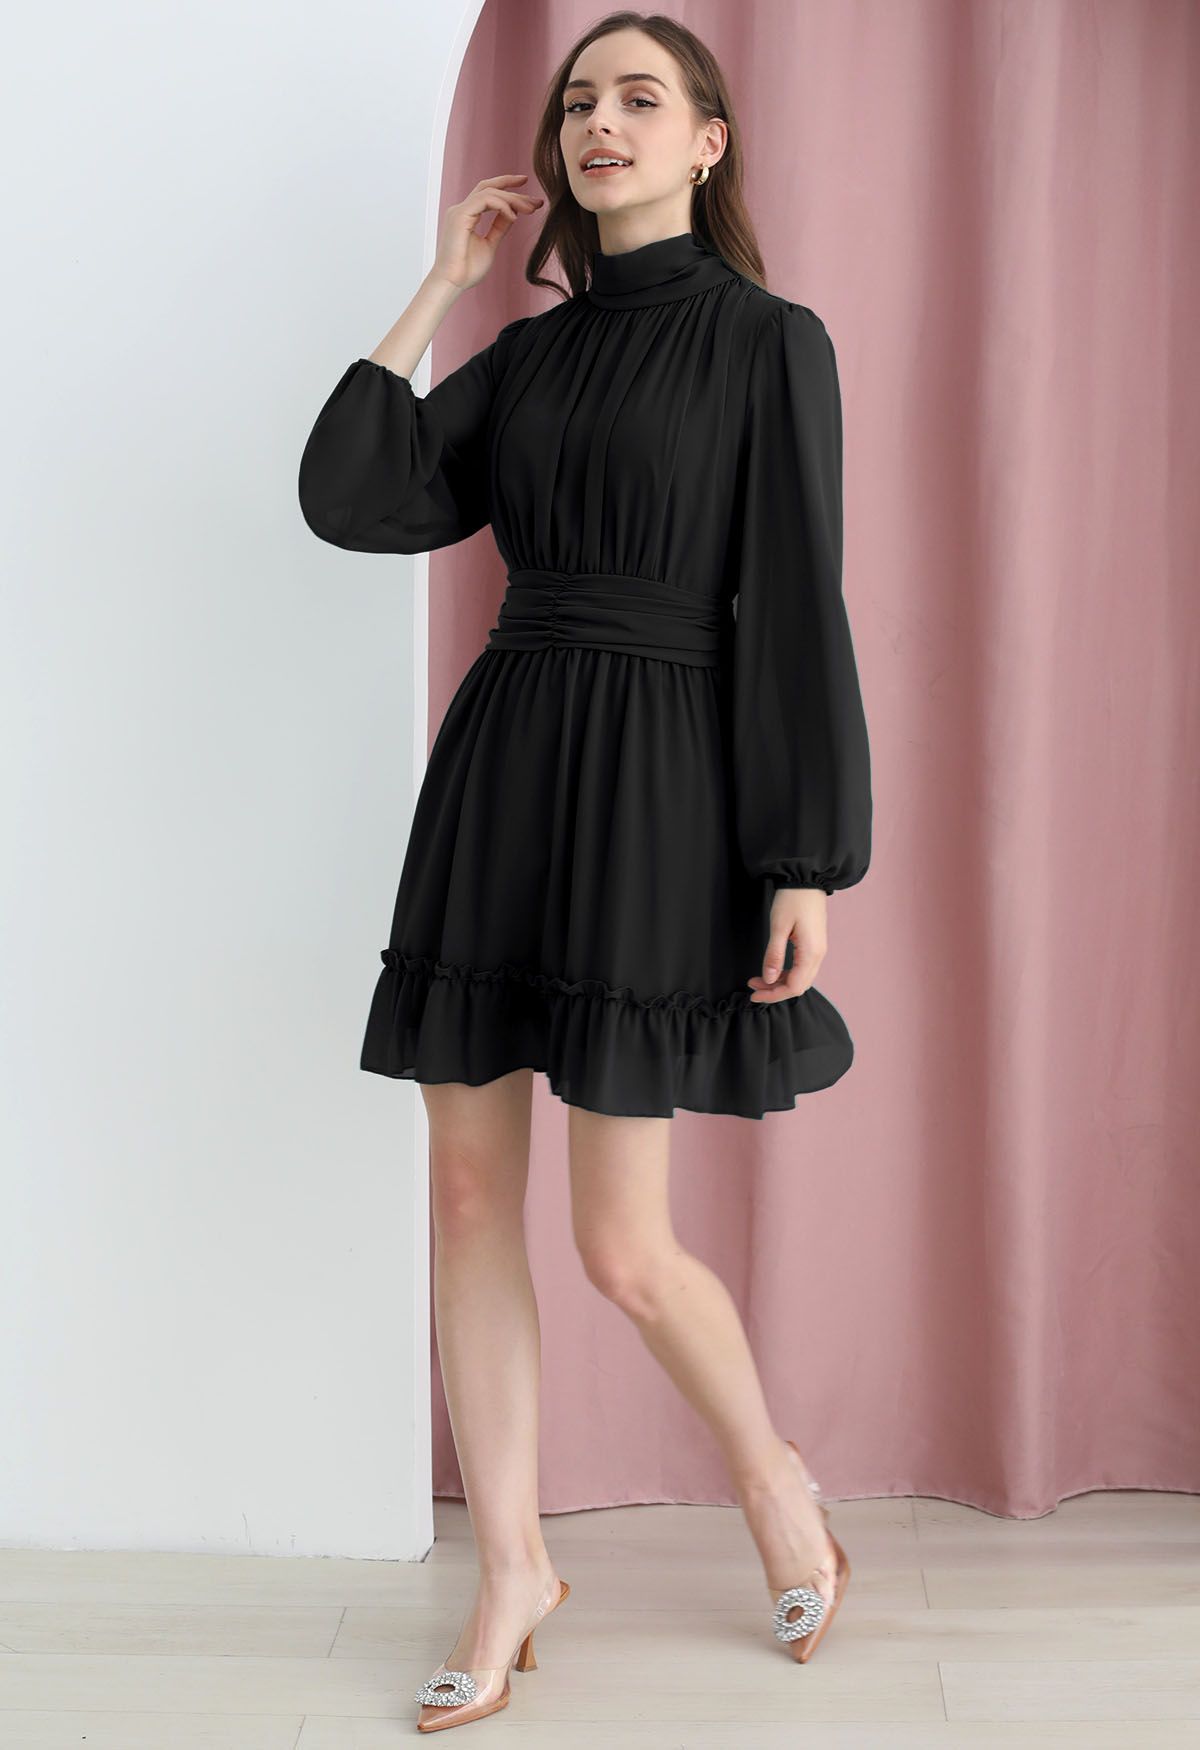 Mock Neck Ruched Waist Airy Chiffon Dress in Black